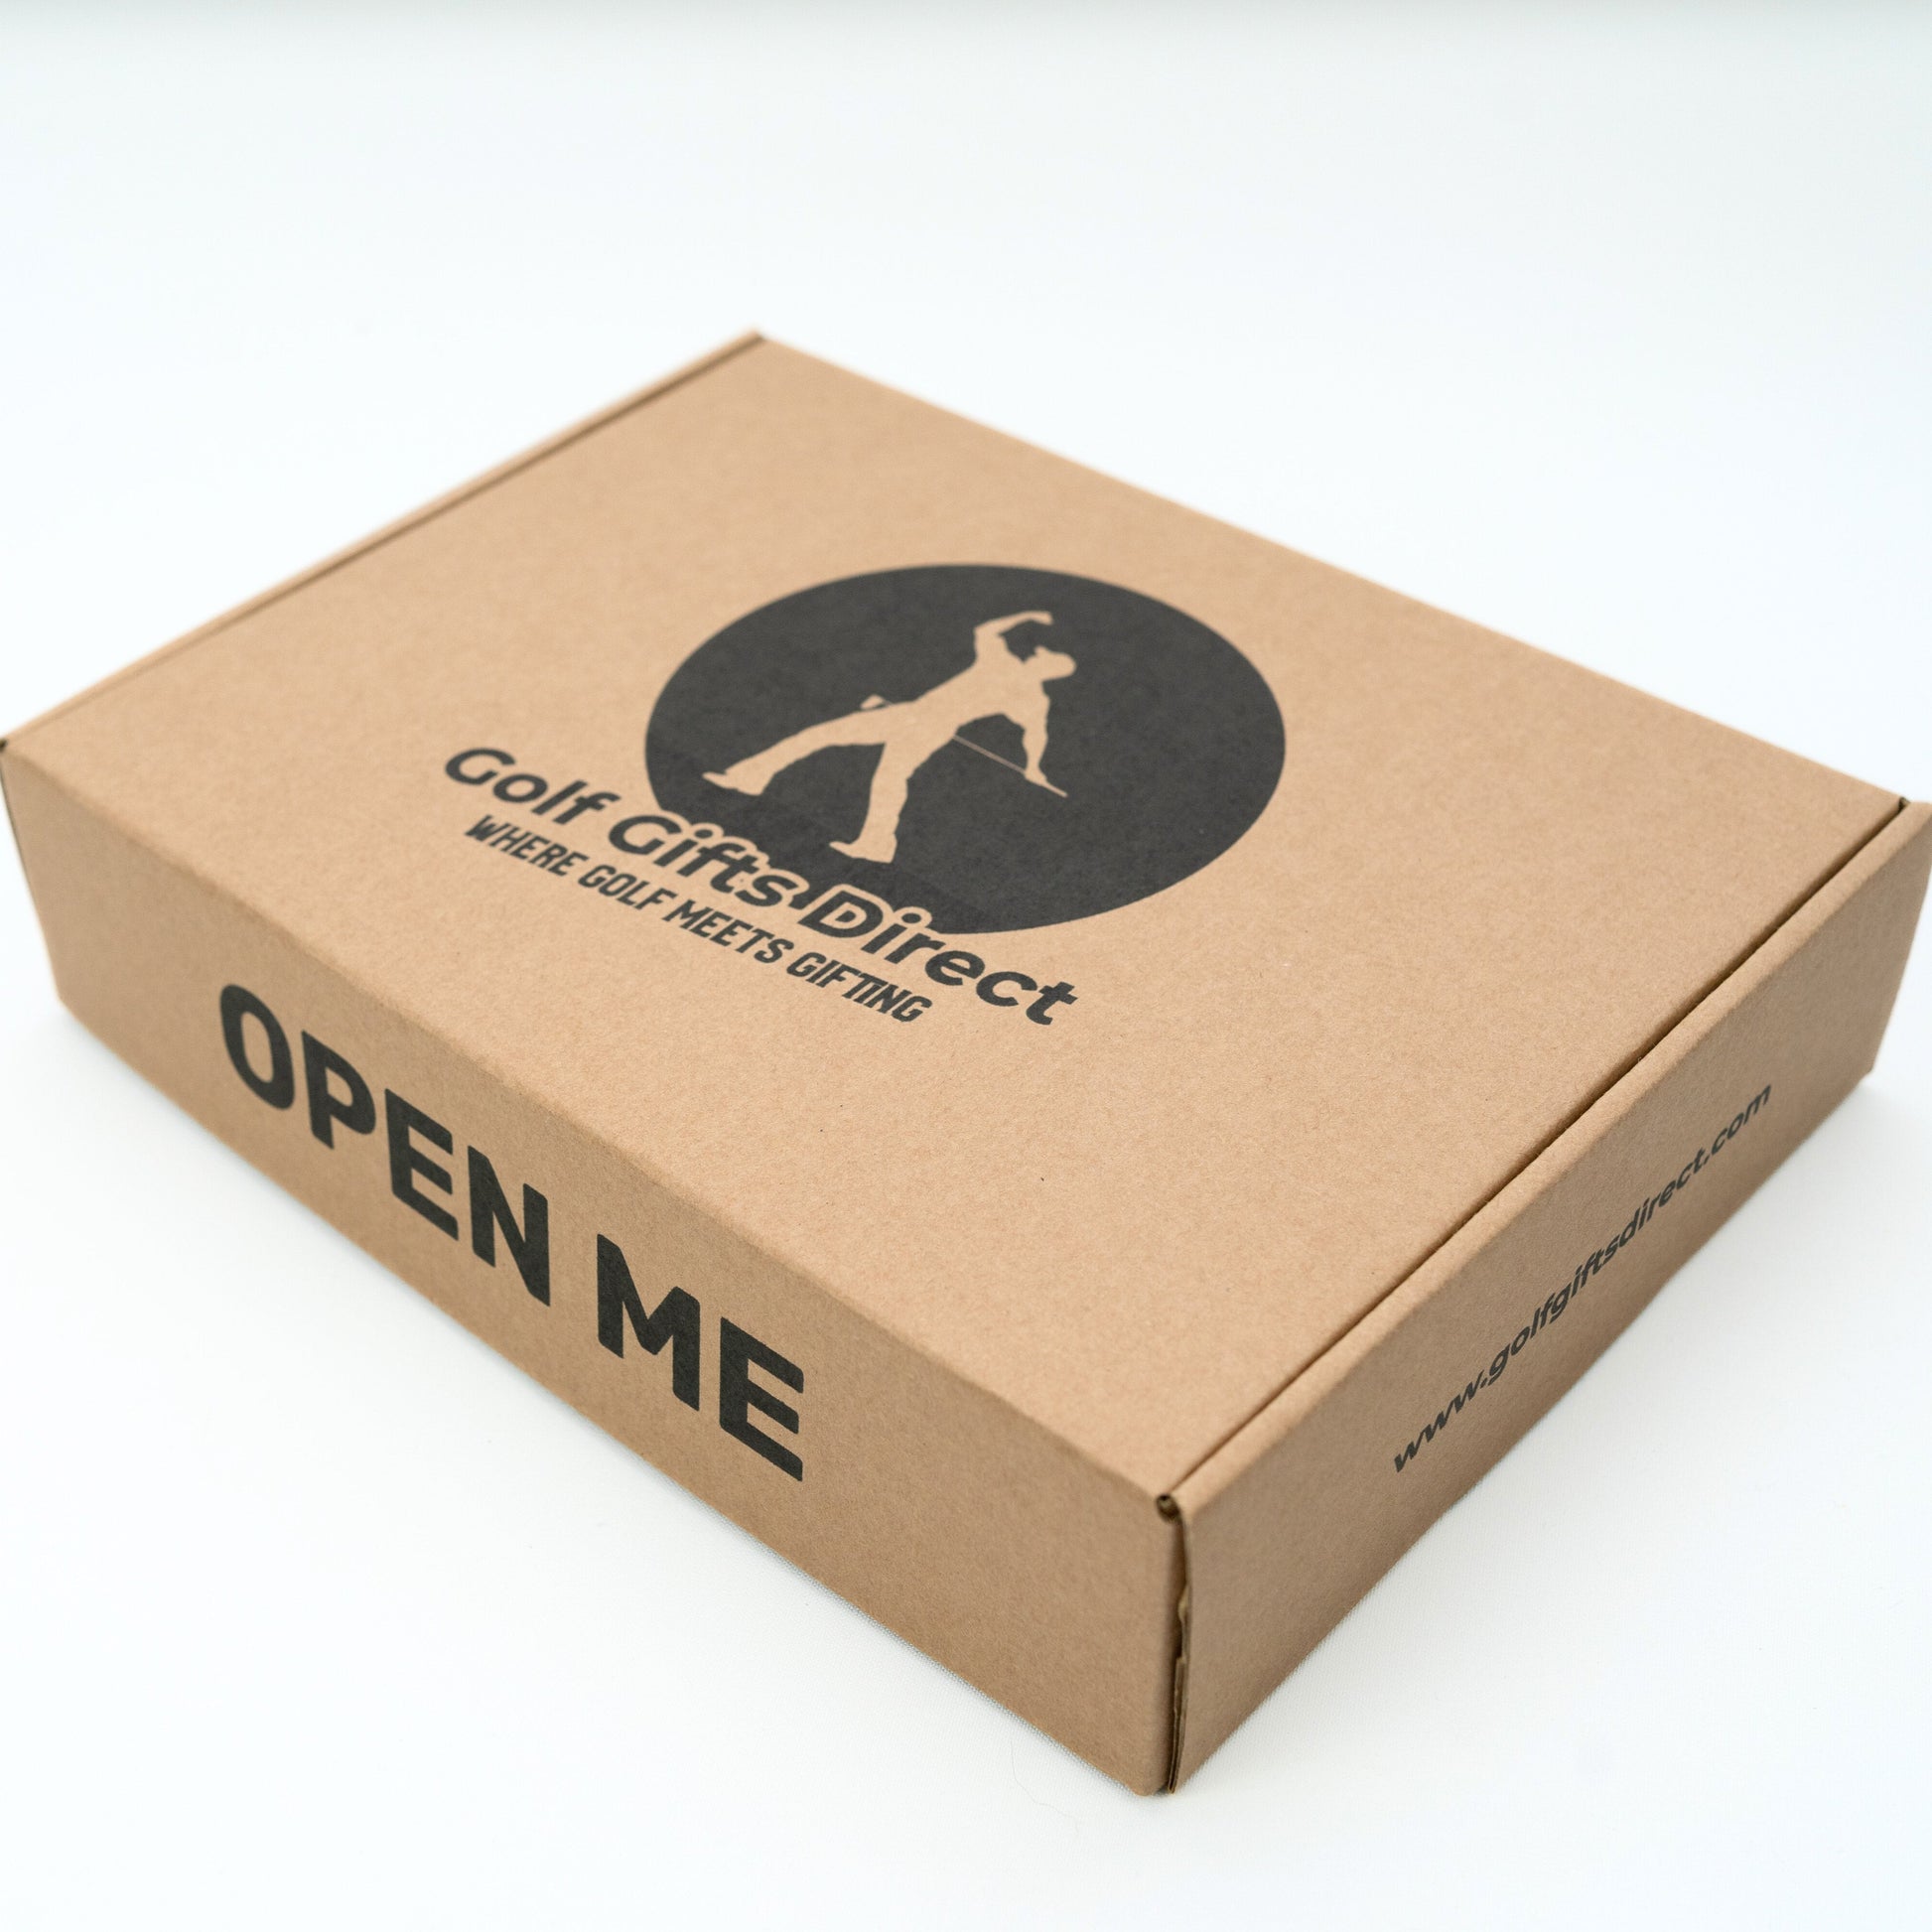 Golf Gifts For Men - The All Rounder Gift Box - The Perfect Choice – Golf  Gifts Direct